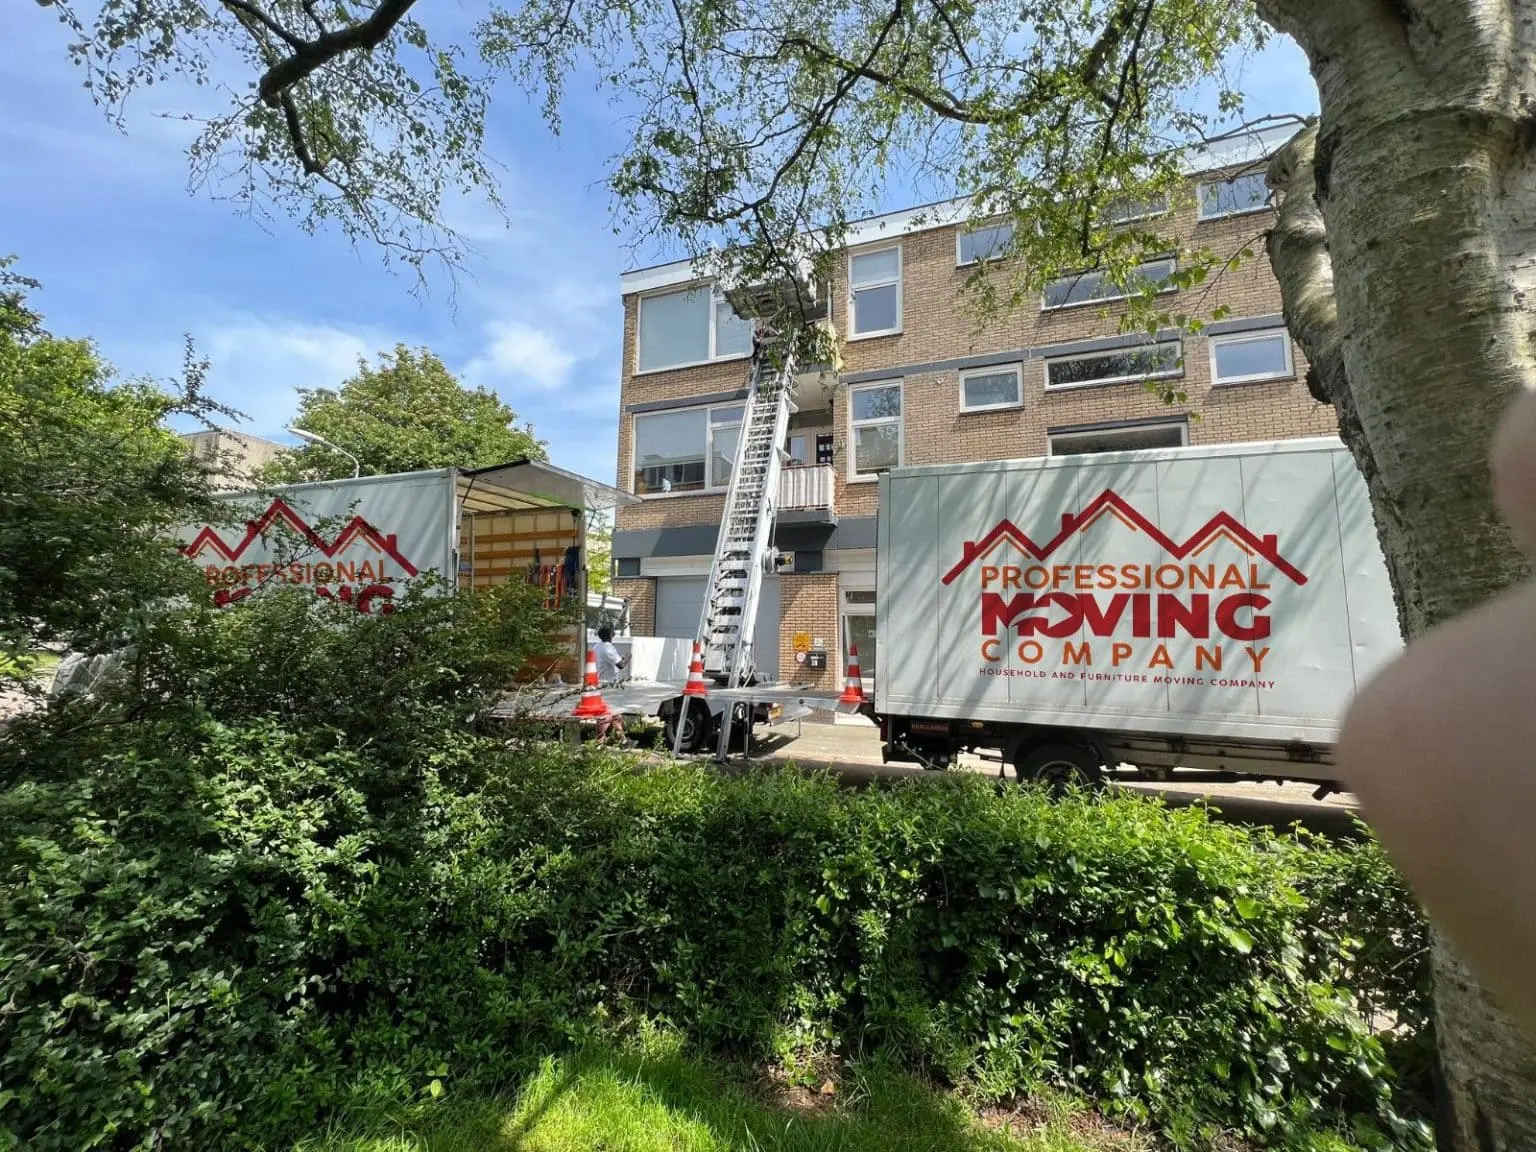 Moving Company Vlaardingen | Customized Moving Services to Suit Your Unique Requirements